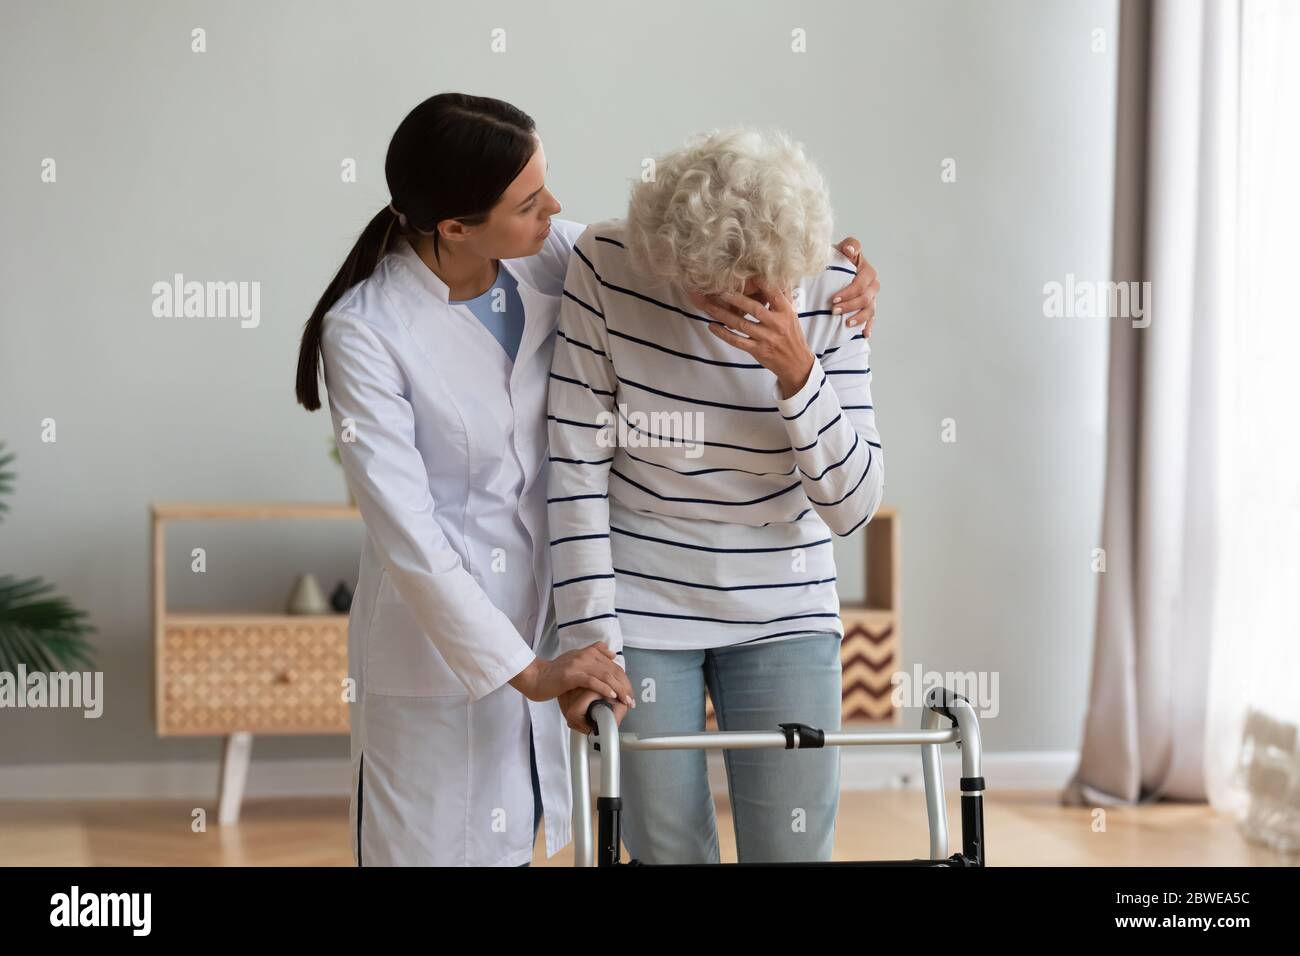 Caring nurse comforting unhappy aged disabled crying woman Stock Photo